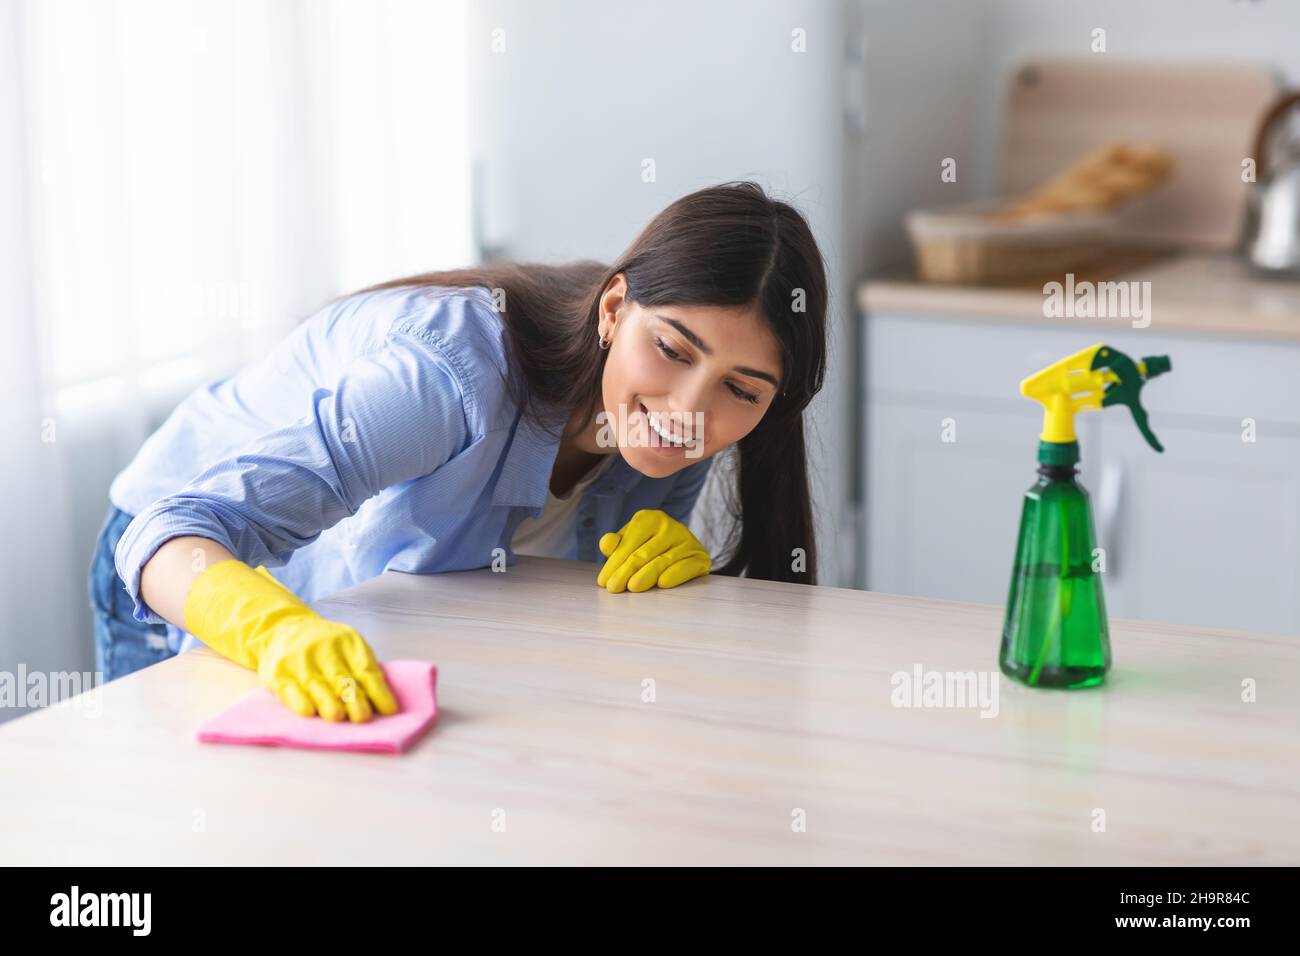 https://c8.alamy.com/comp/2H9R84C/cheerful-young-woman-cleaning-dining-table-at-kitchen-2H9R84C.jpg